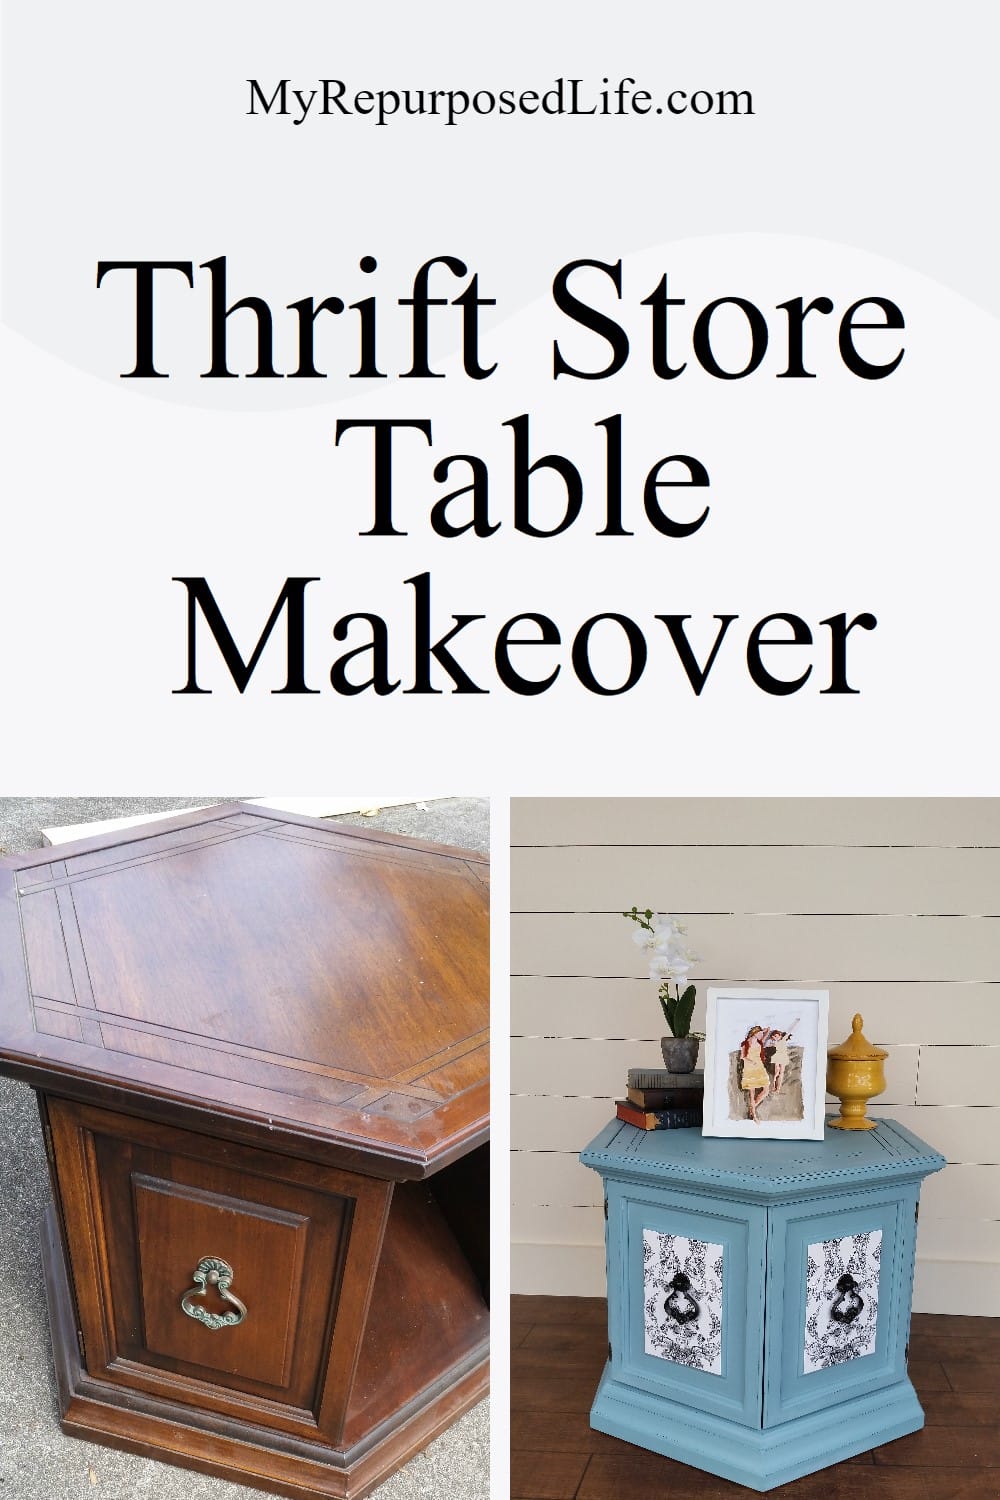 Hexagon Side Table Makeover easy decoupage project! Tips for decoupage, painting, and distressing. You will want to save this to refer back to! #MyRepurposedLife #repurposed #furniture #makeover #tips #tricks #diy #decoupage #distressing #painted via @repurposedlife